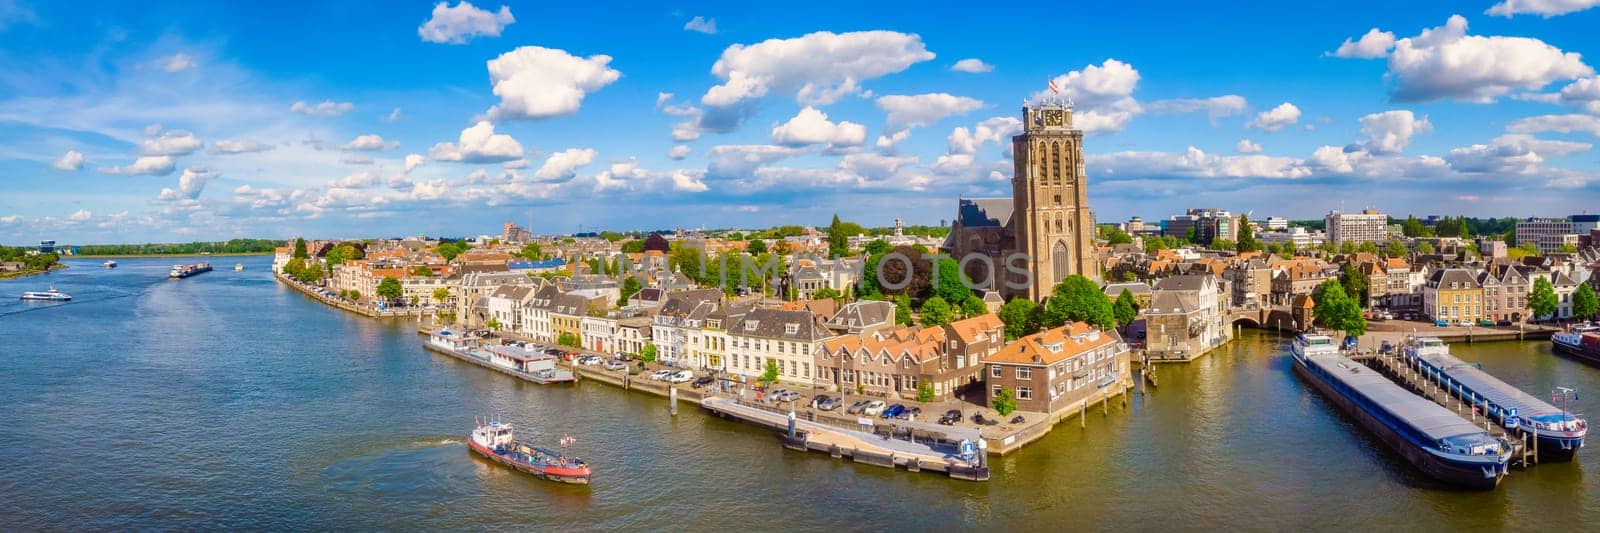 Panoramic view of Dordrecht Netherlands the skyline of the old city of Dordrecht with a church and canal buildings in the Netherlands.